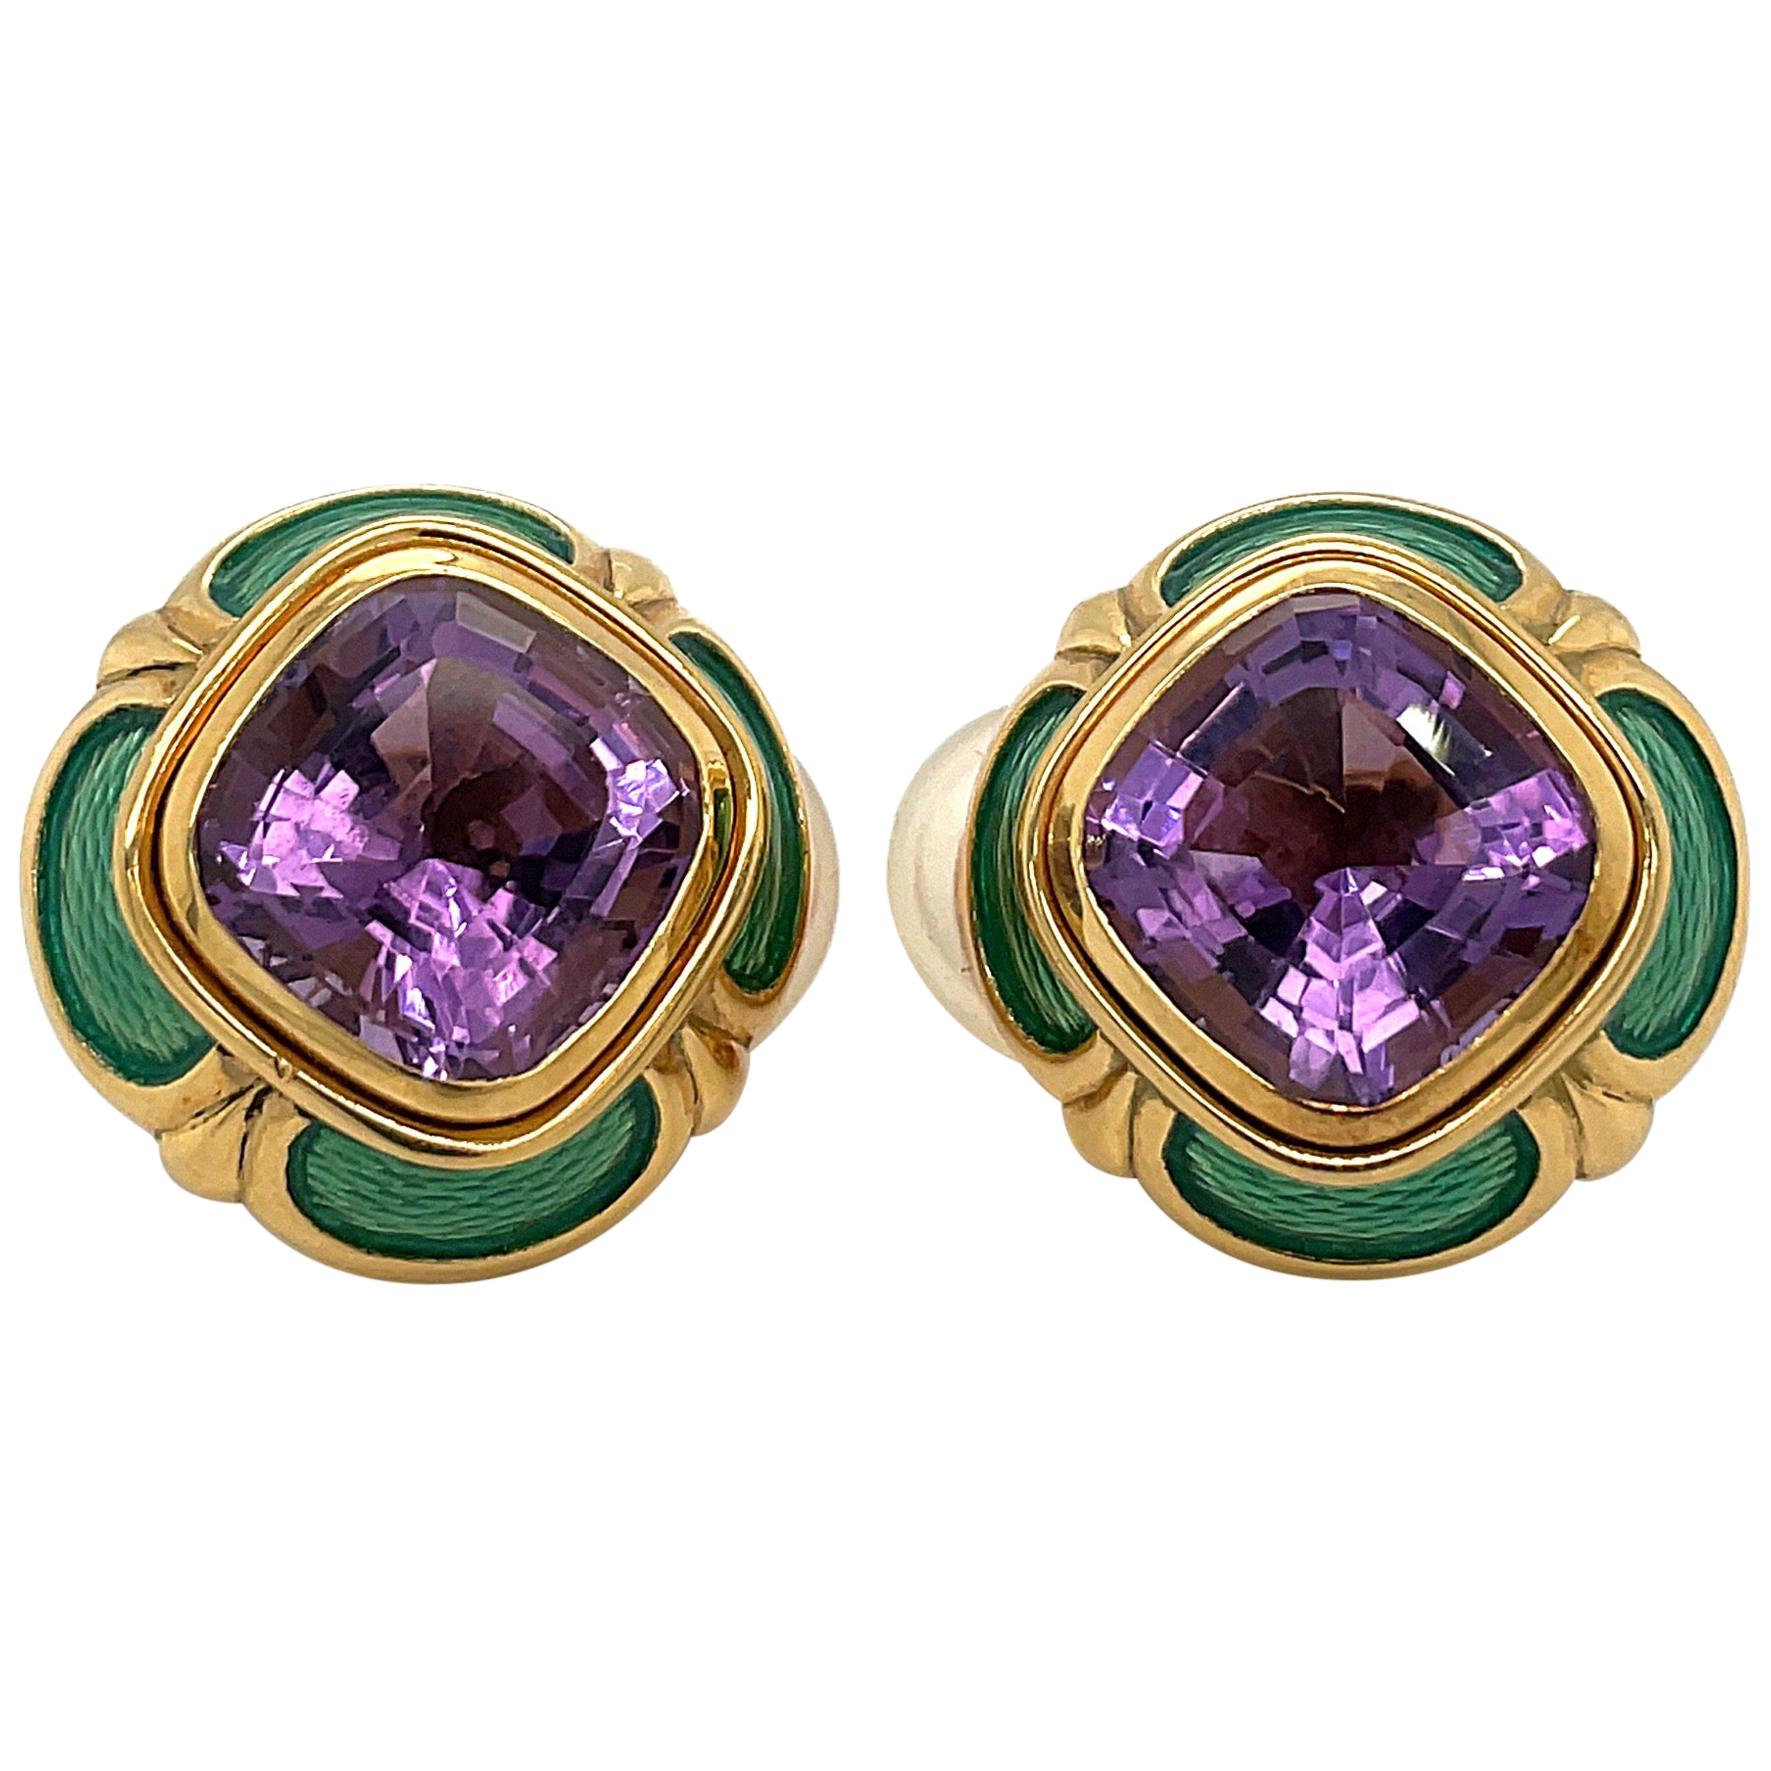 Leo De Vrooman 18kt Yellow Gold Earrings with 17.67ct. of Amethysts